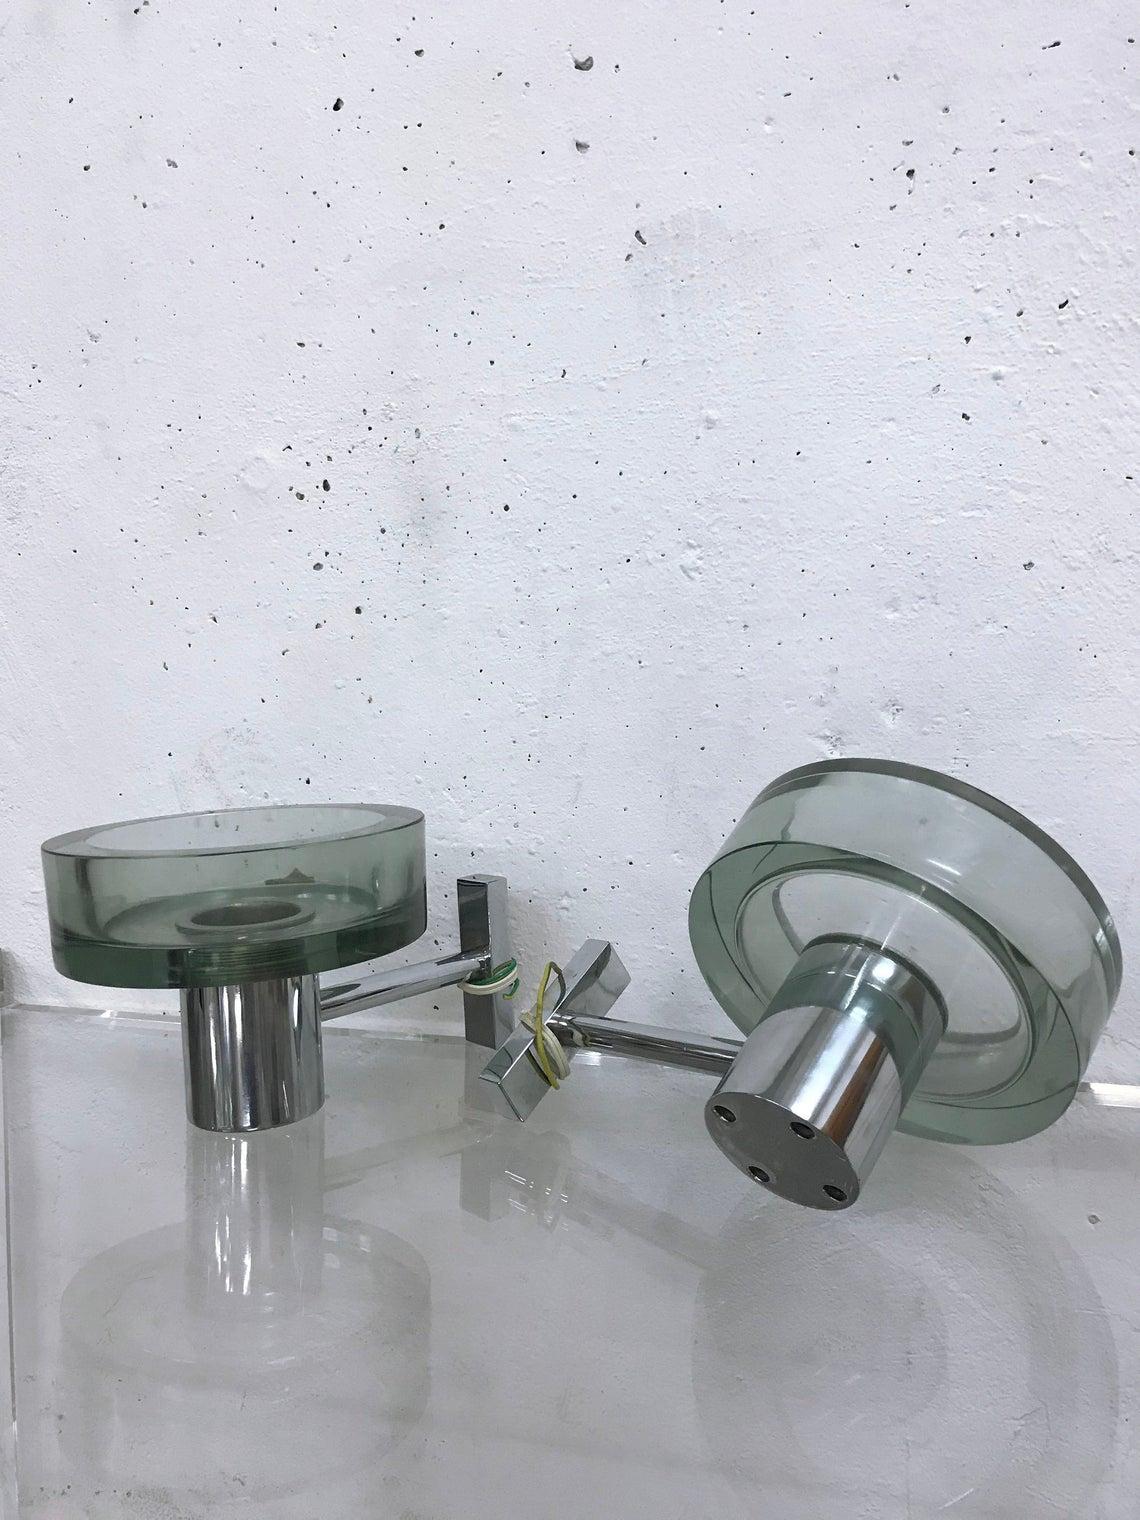 Pair of modernist Italian wall lights made of Murano glass and chrome-plated metal

The lamps were designed by Flavio Poli for Seguso in the 1960s

Lamps are unused

E27 lamp socket.
  